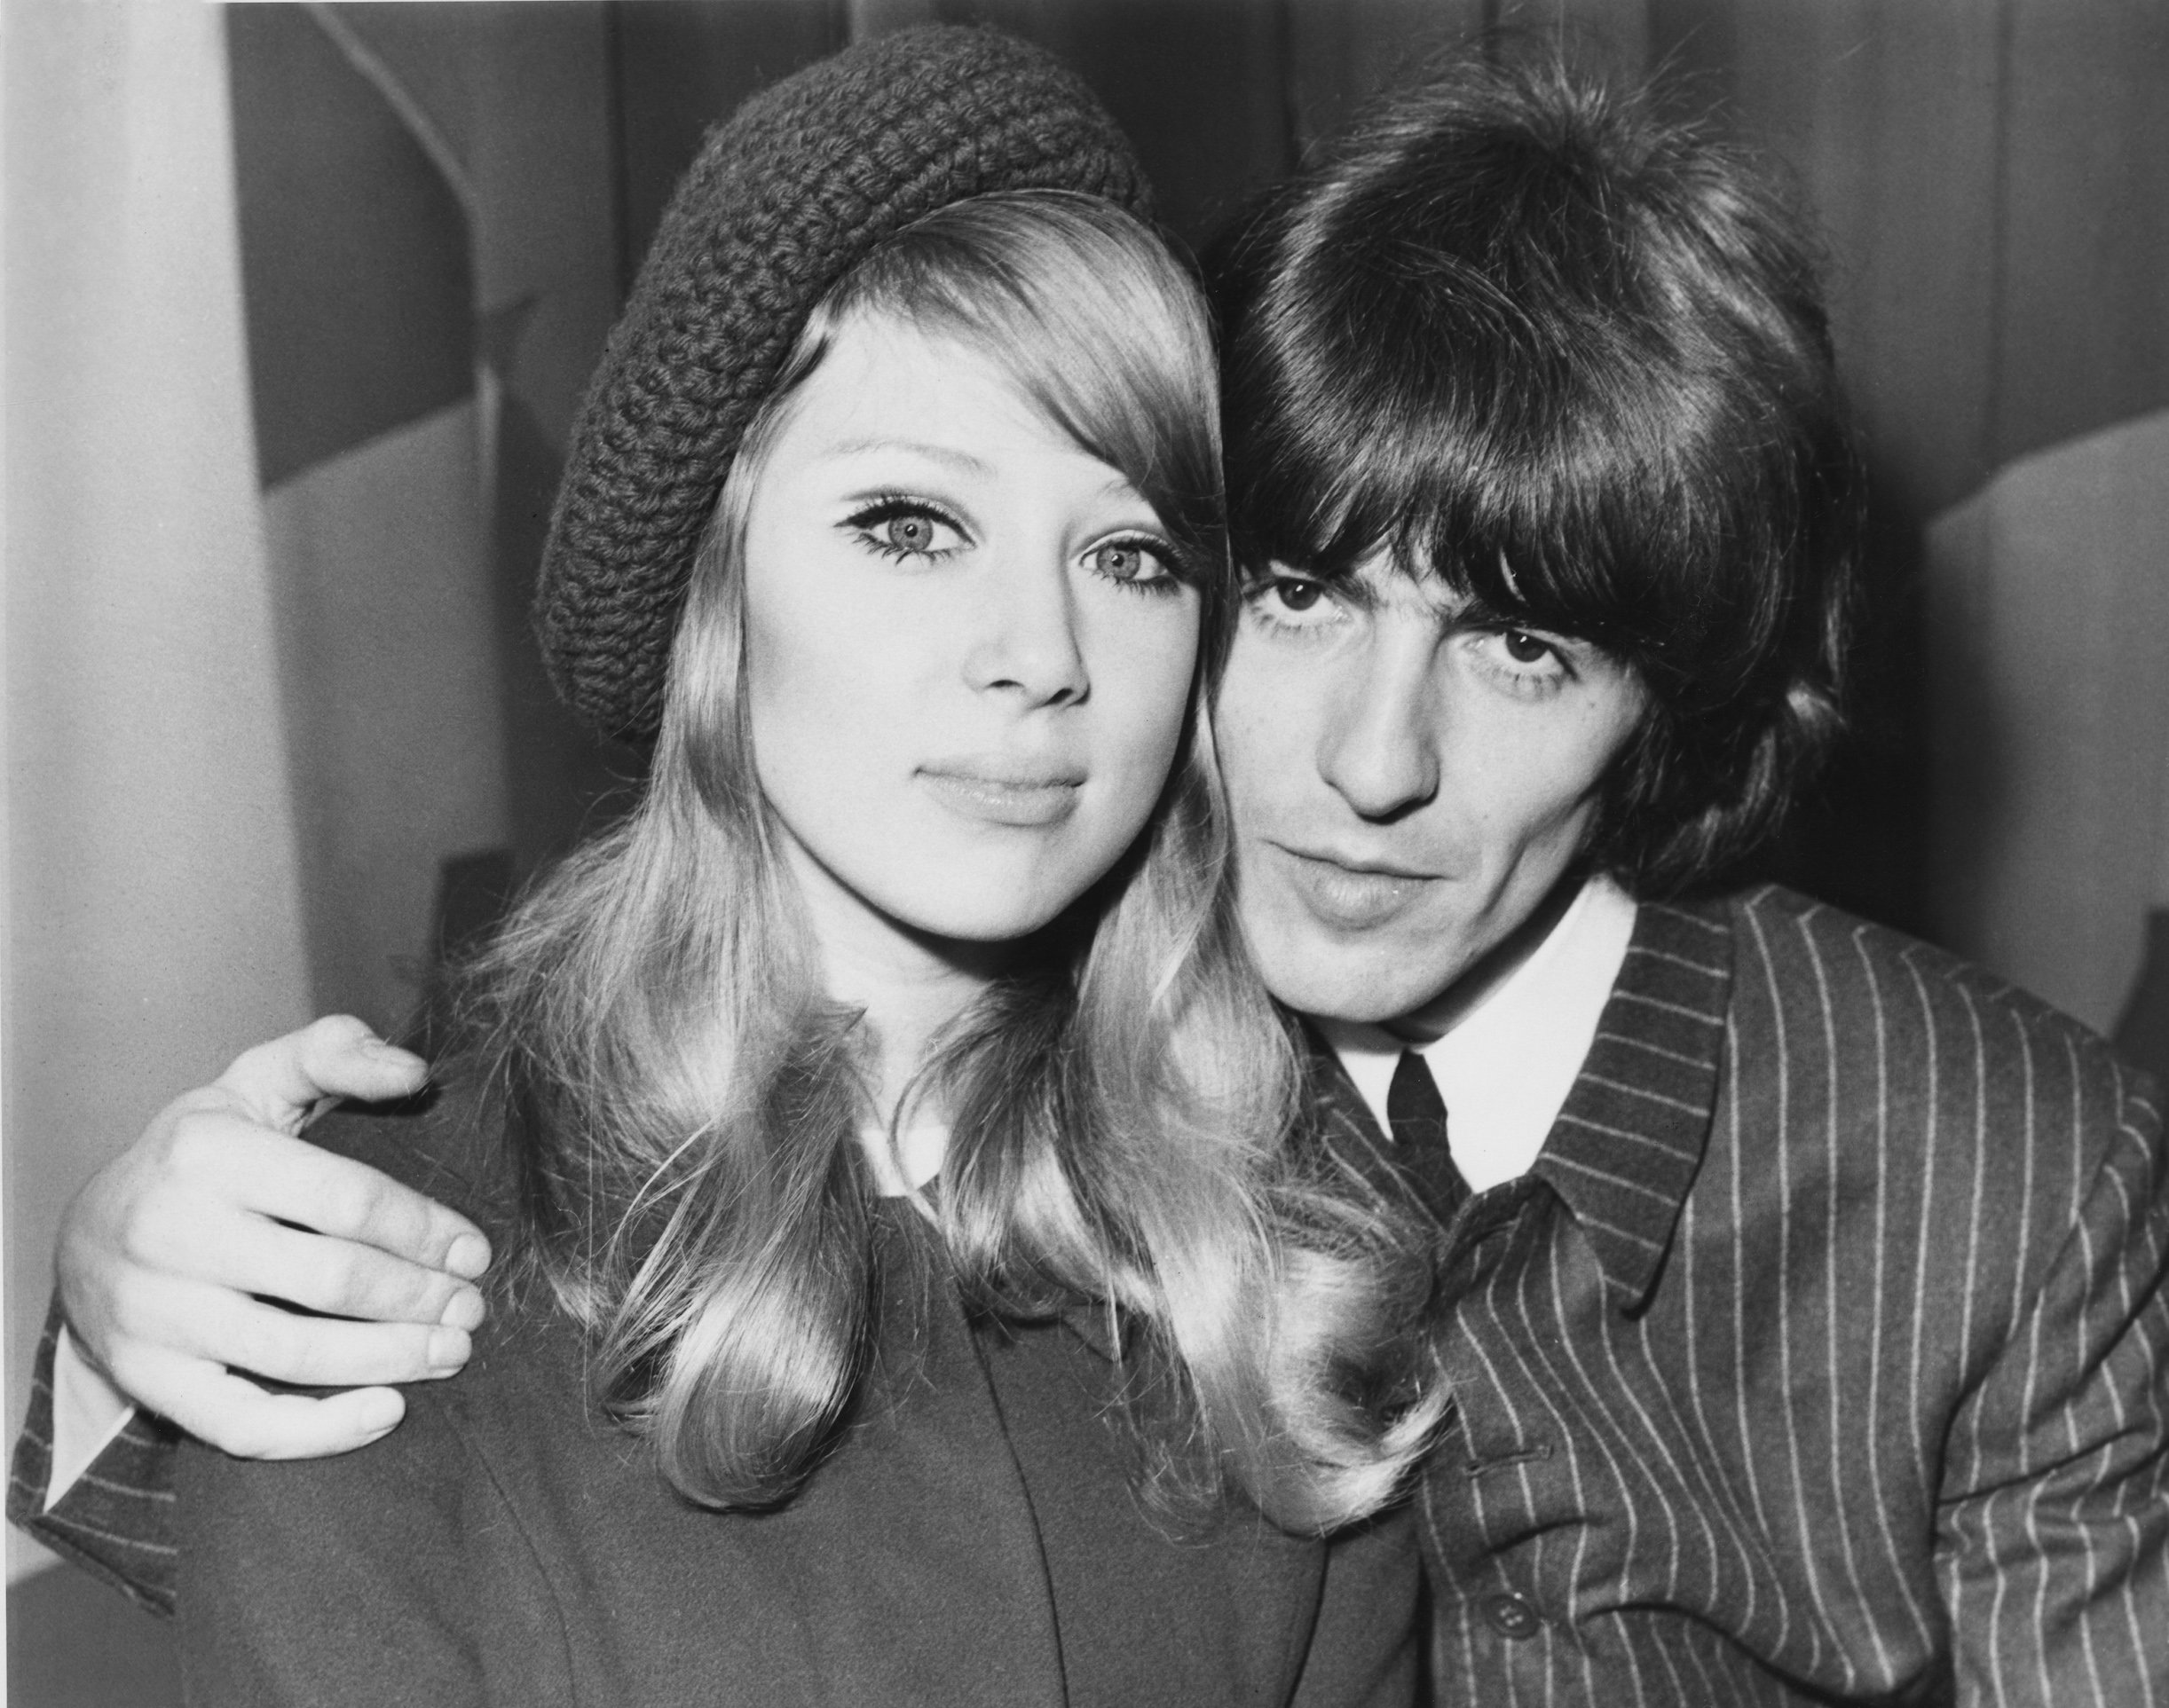 Pattie Boyd and George Harrison in the West End of London in 1966